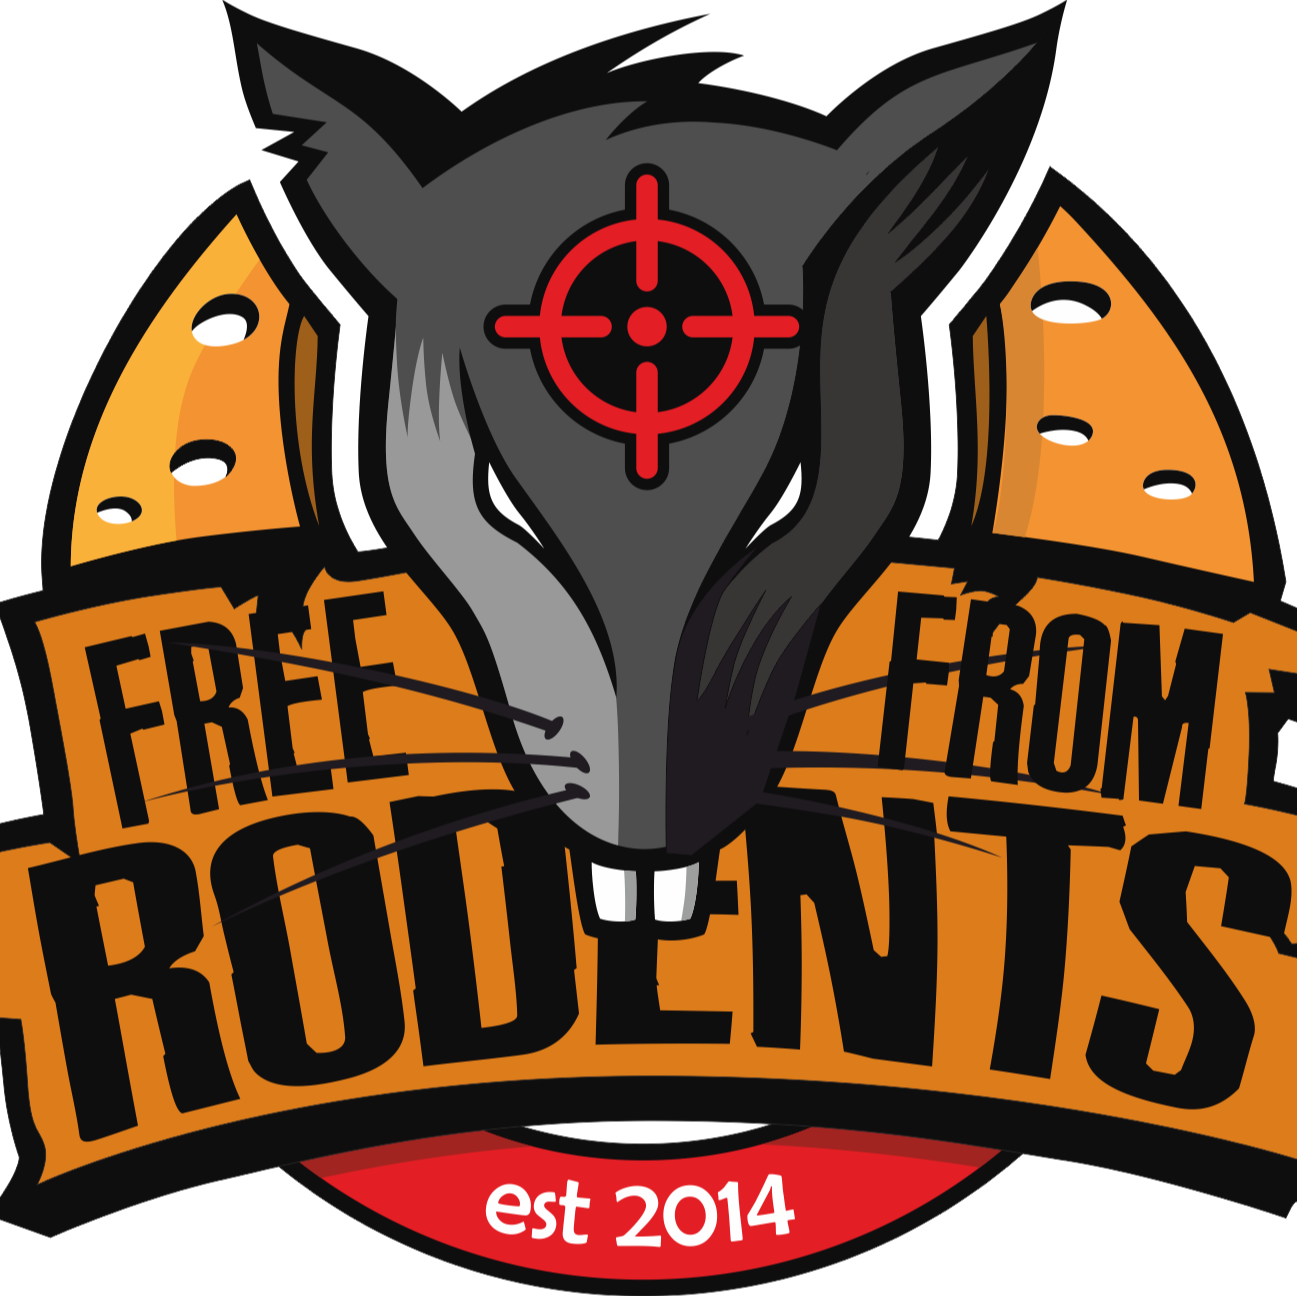 Free From Rodents